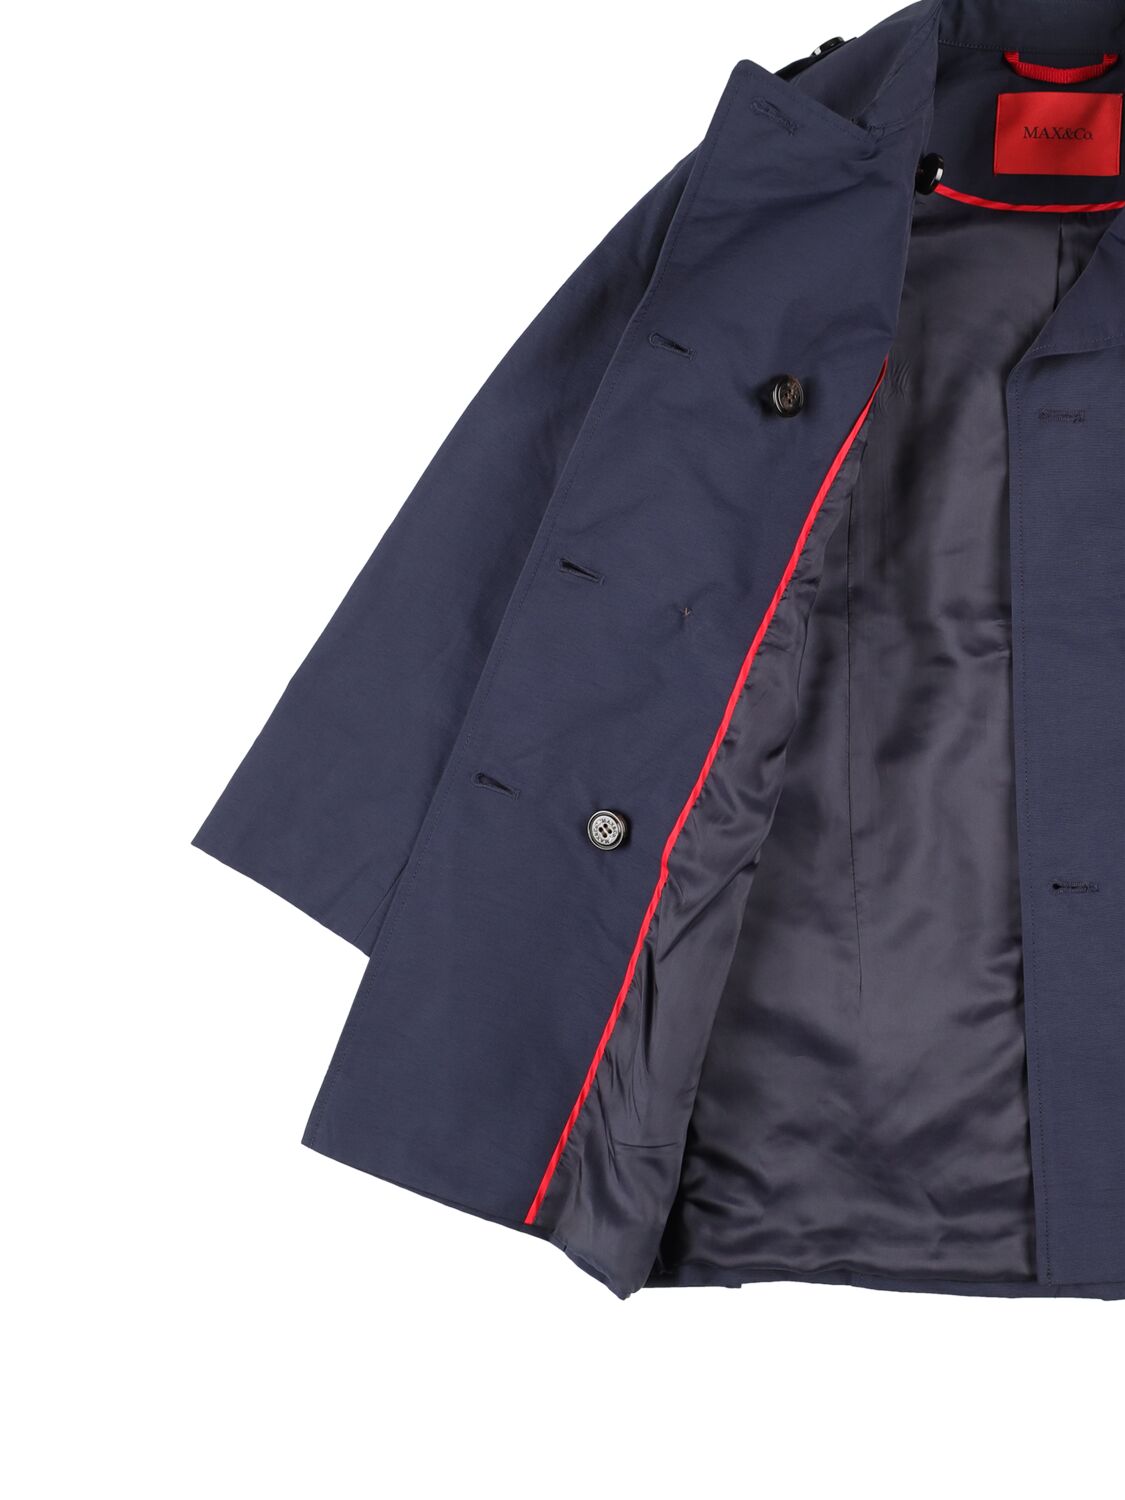 Shop Max & Co Ottoman Cotton & Nylon Trench Coat In Navy